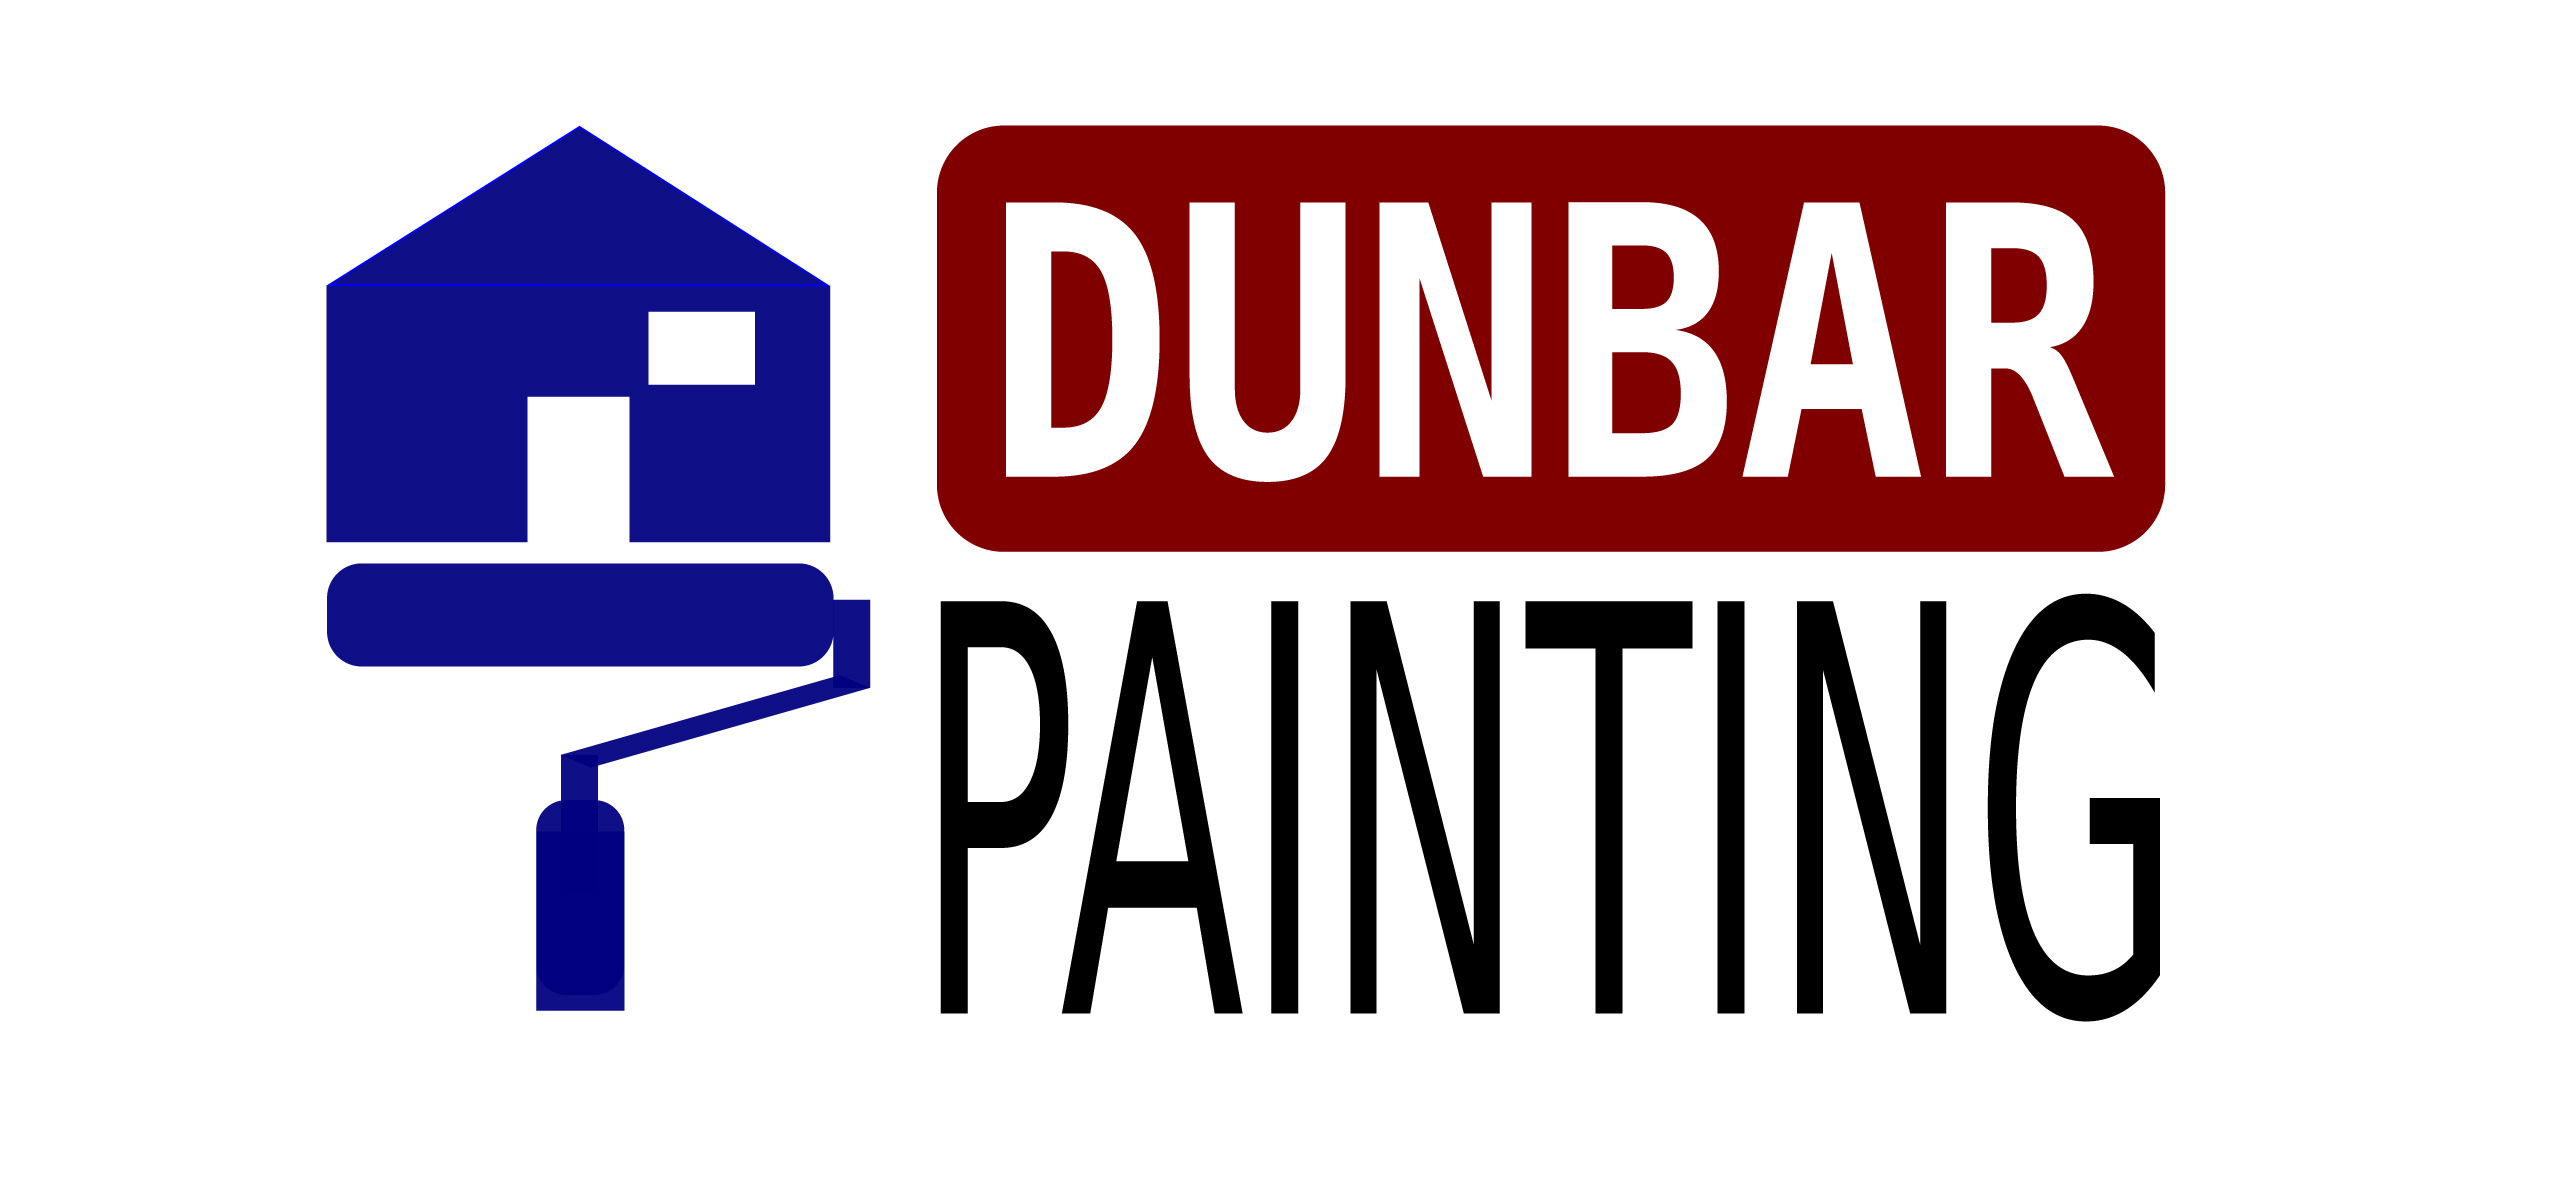 House Painting Logos Clipart